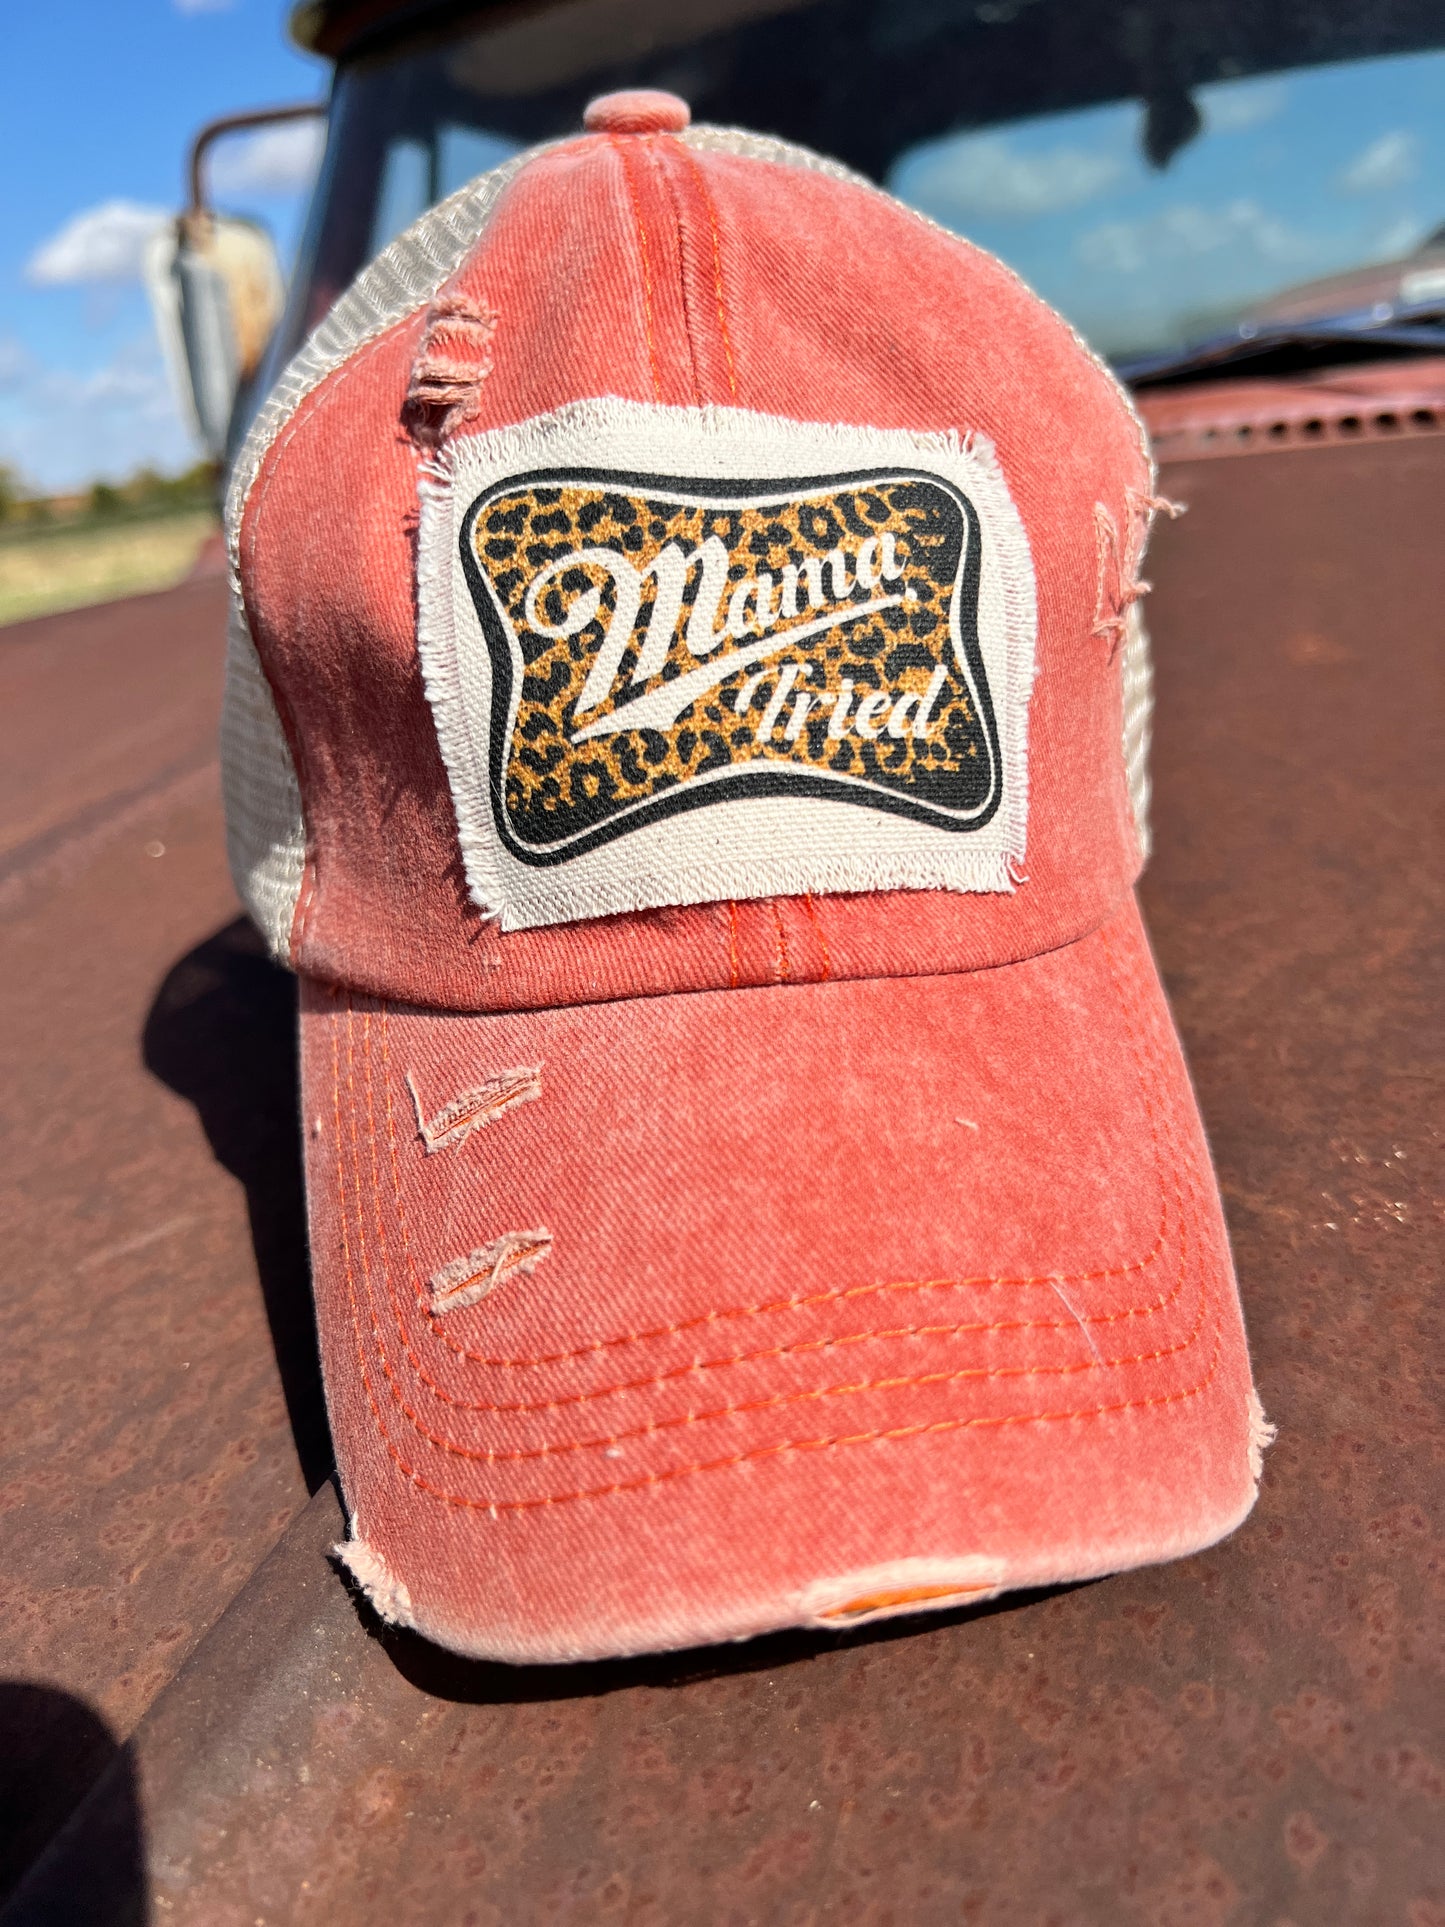 Orange distressed baseball cap with material raggy patch with saying "Mama Tried" 